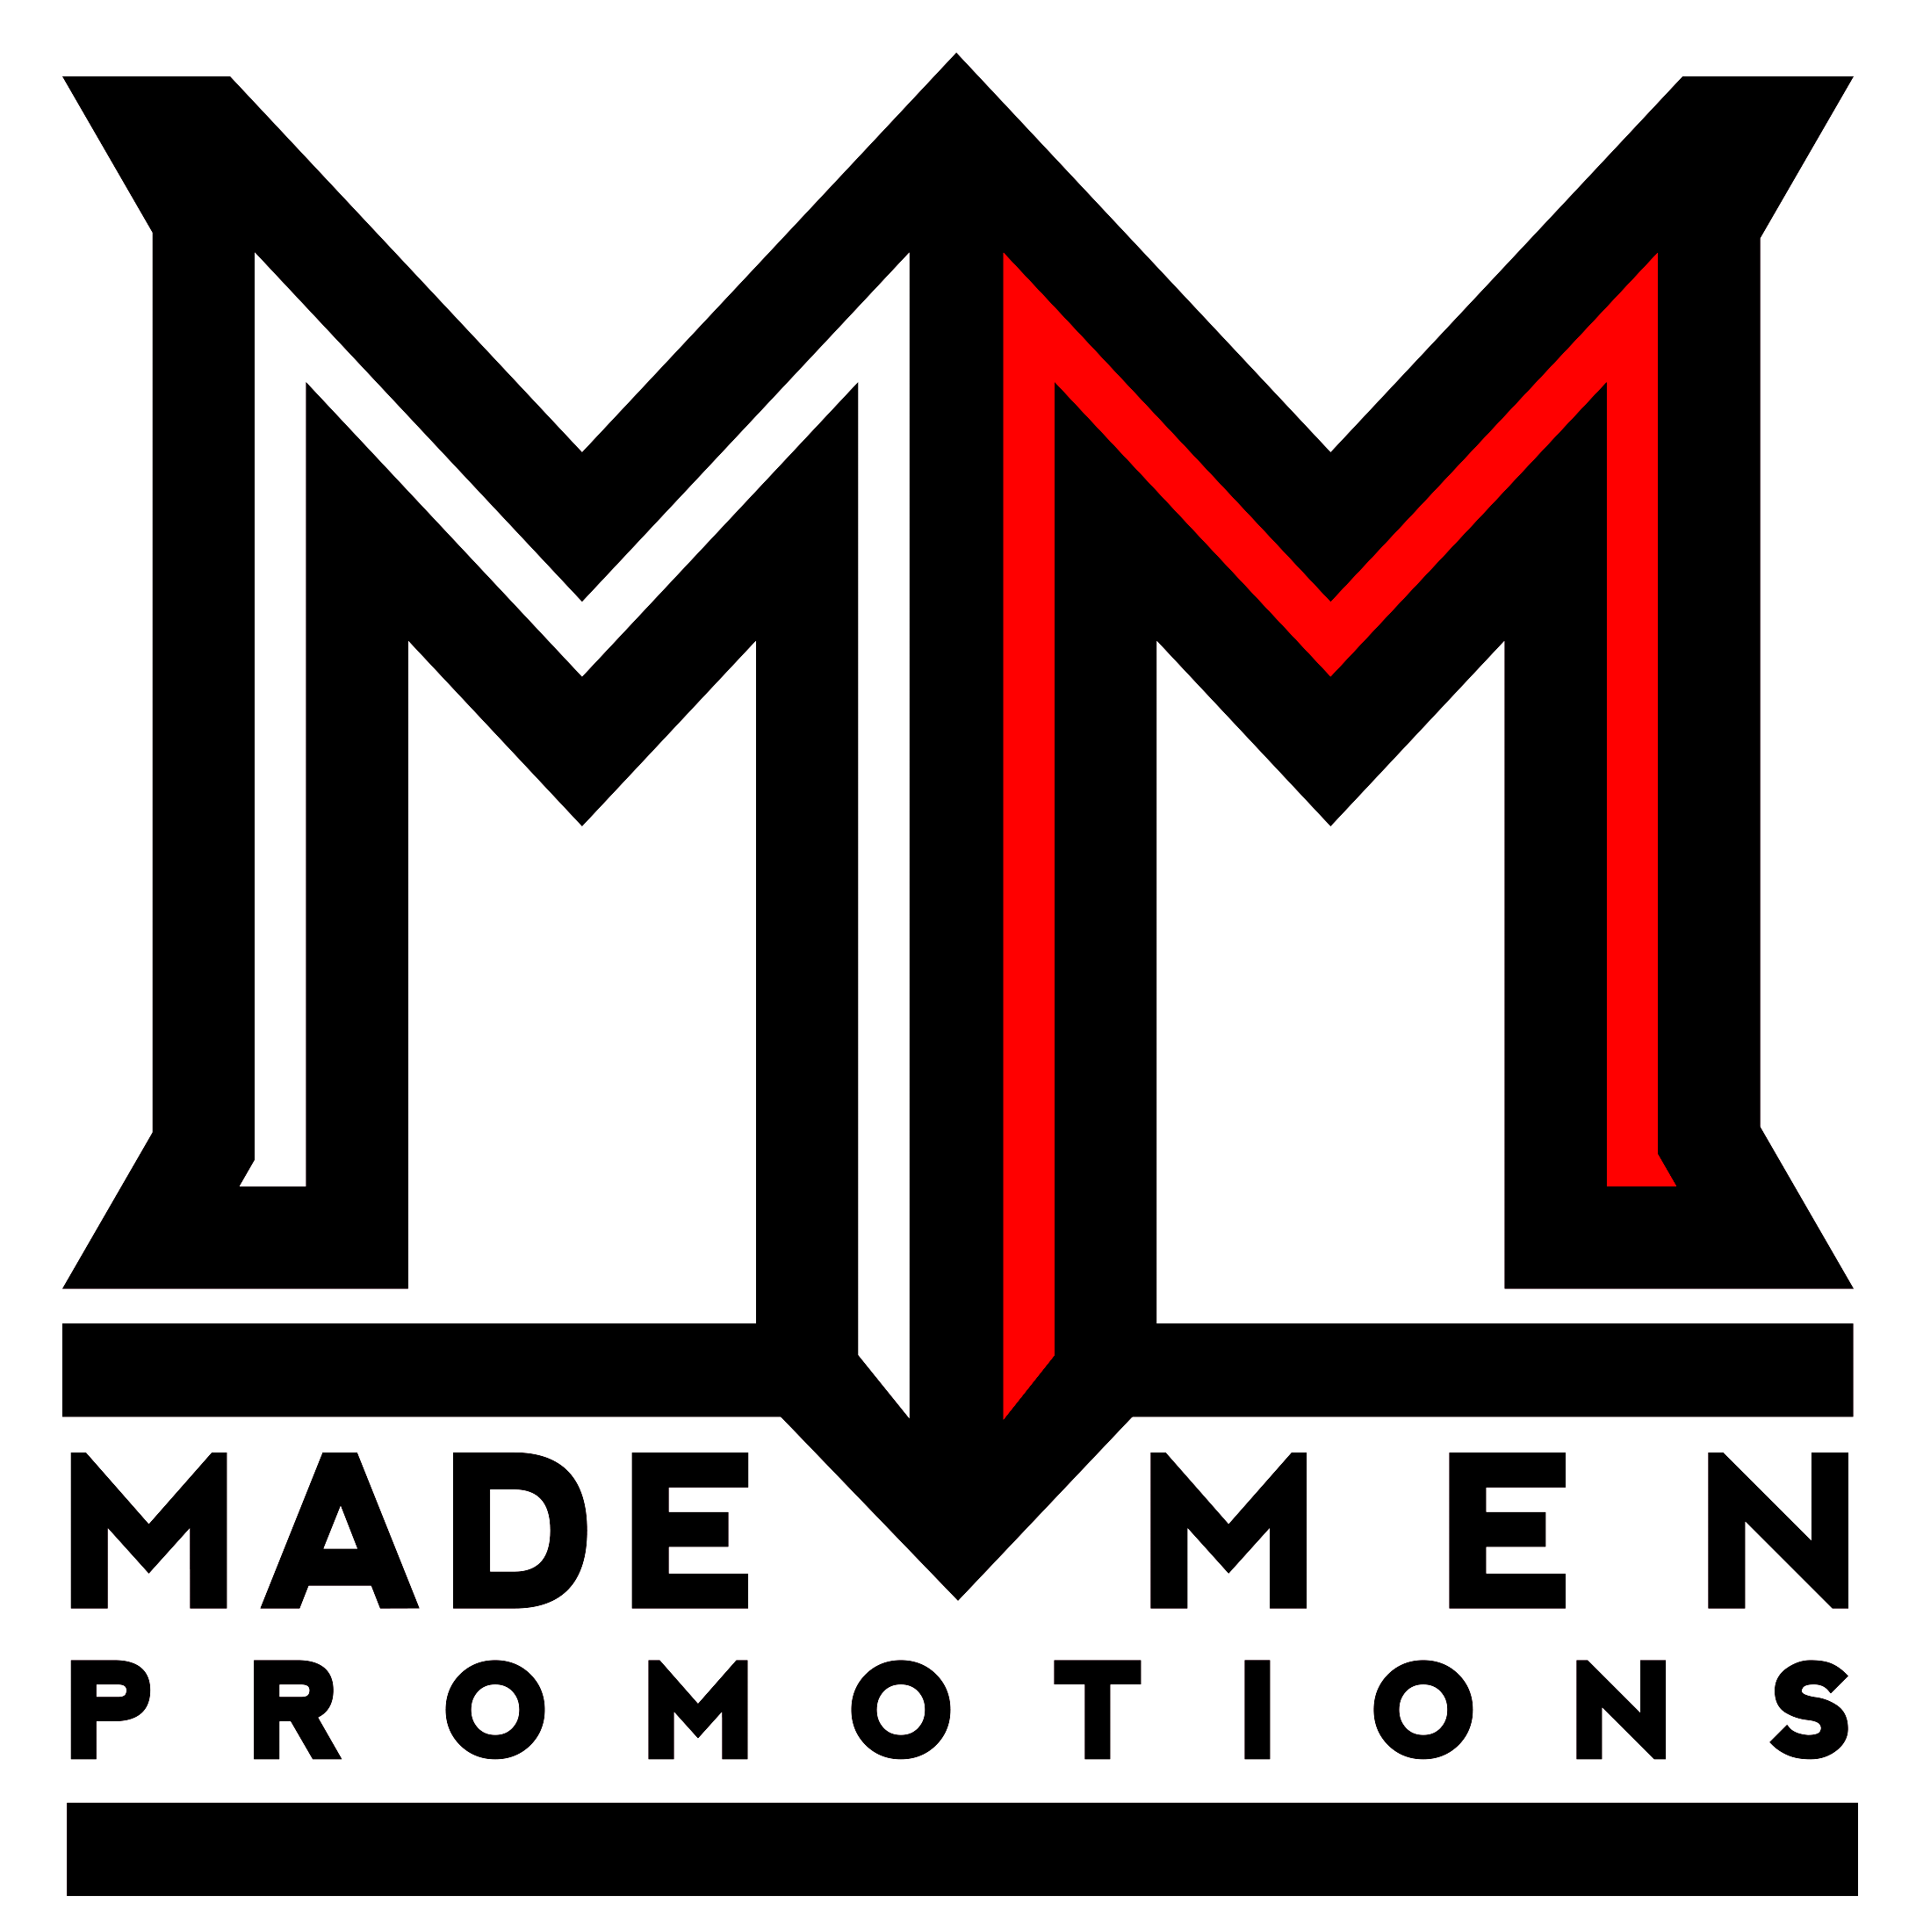 Made Men Promotions